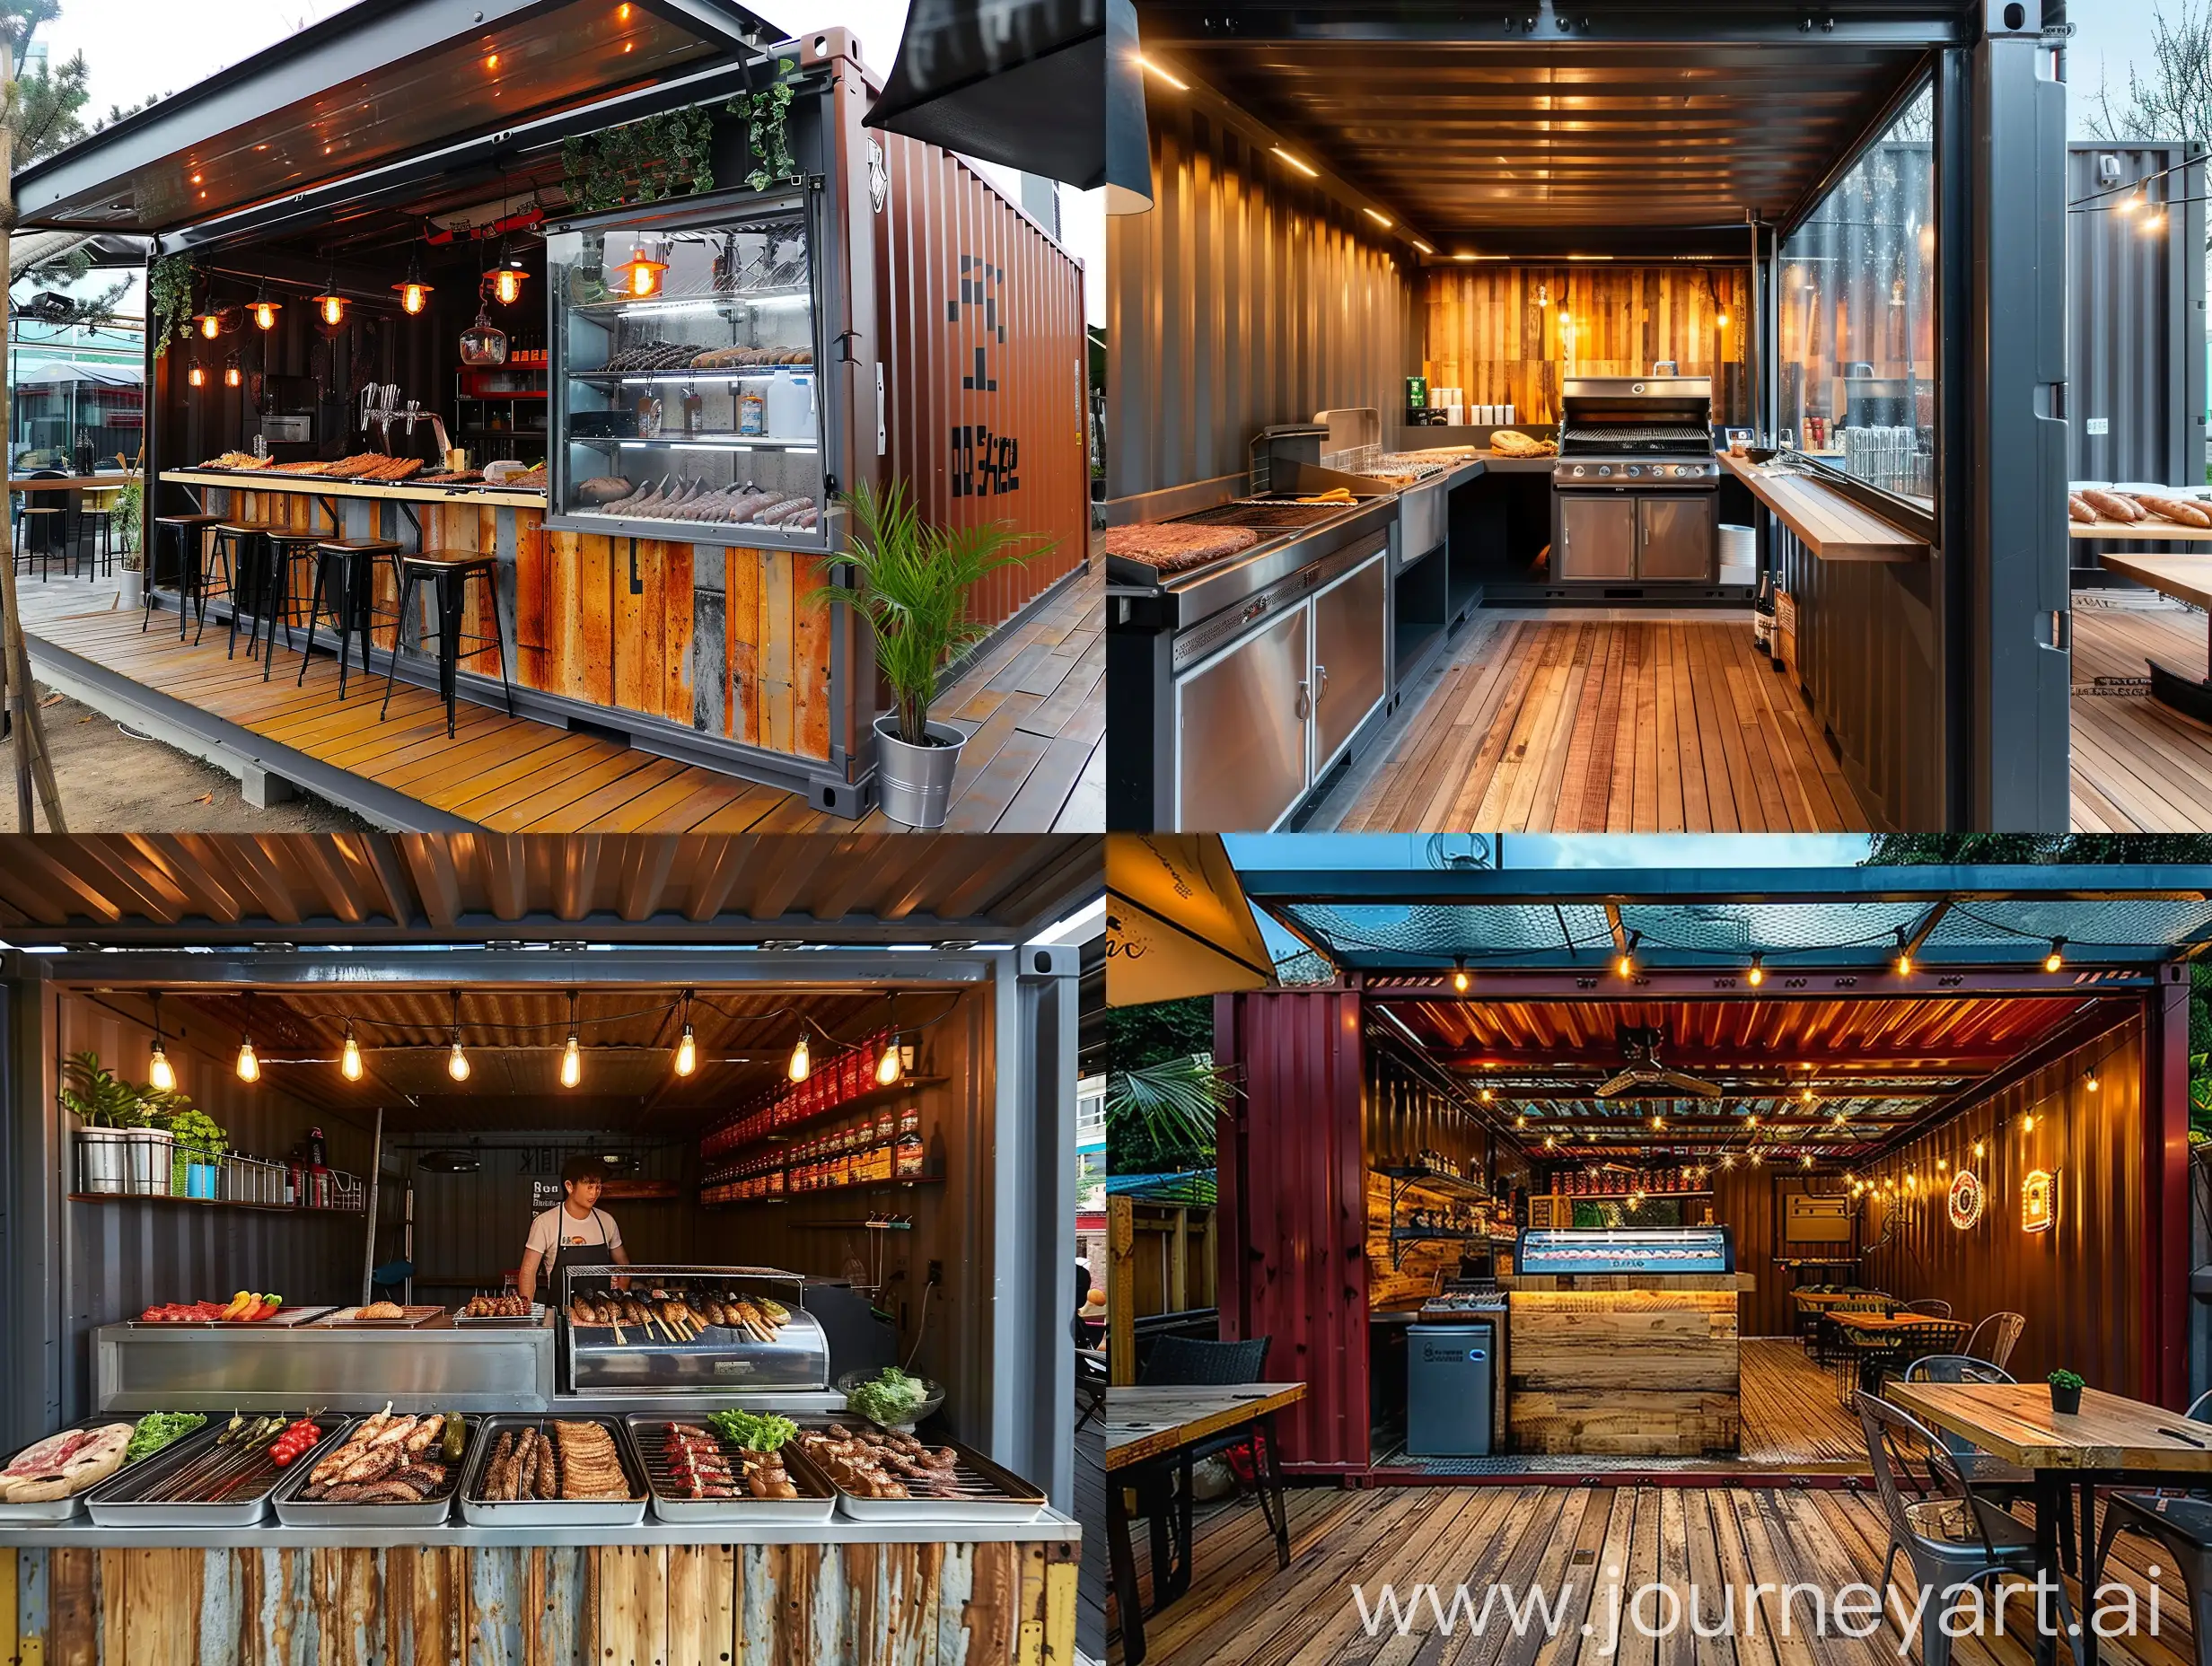 The container room selling barbecue is beautifully decorated, and the appearance is gorgeous and real